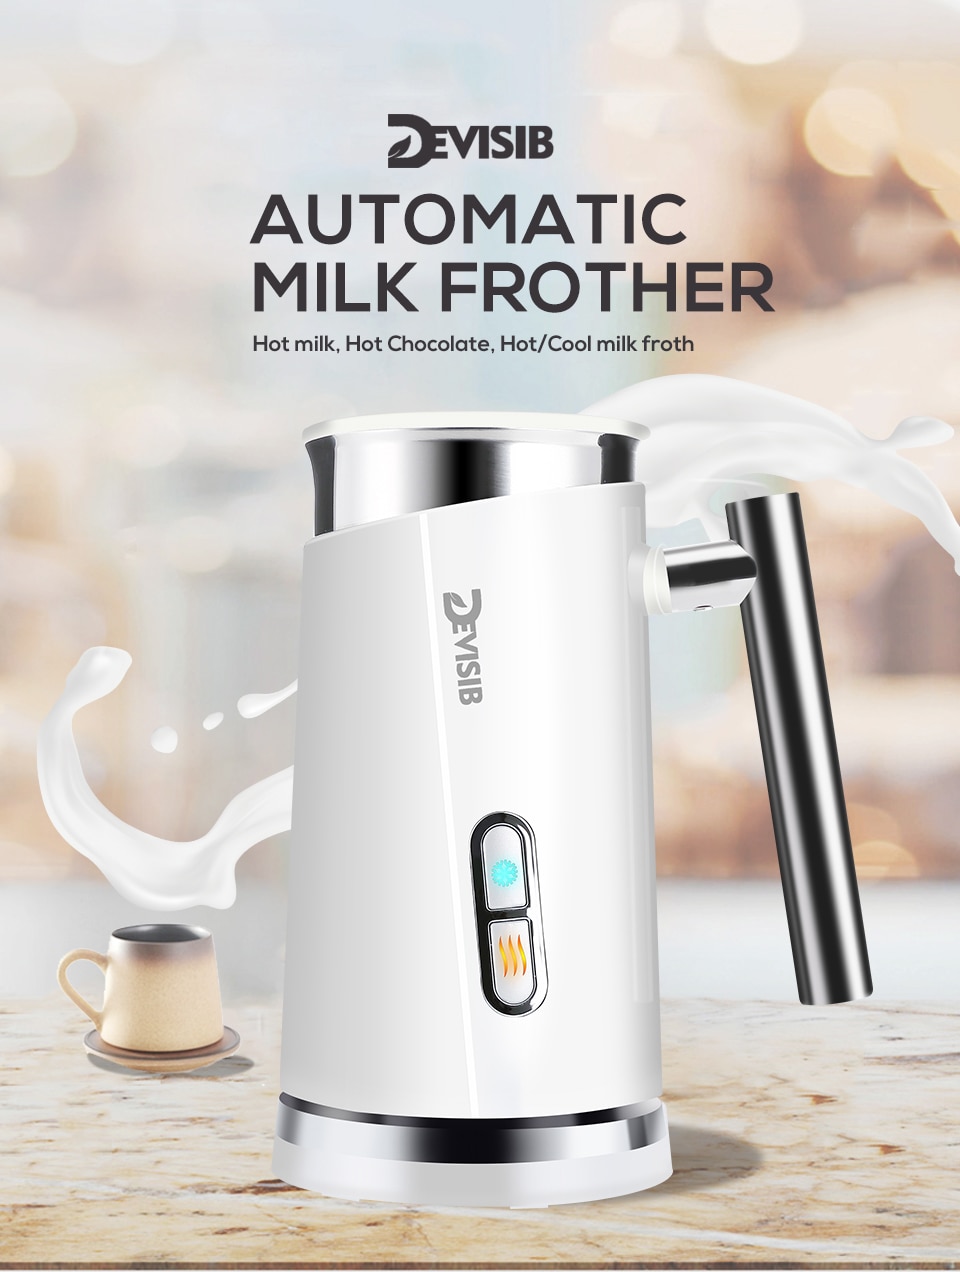 DEVISIB Automatic Milk Frother Milk Steamer Electric Cappuccino Hot /Cold Coffee Stainless Steel CE/GS 220V 3 Year Warranty